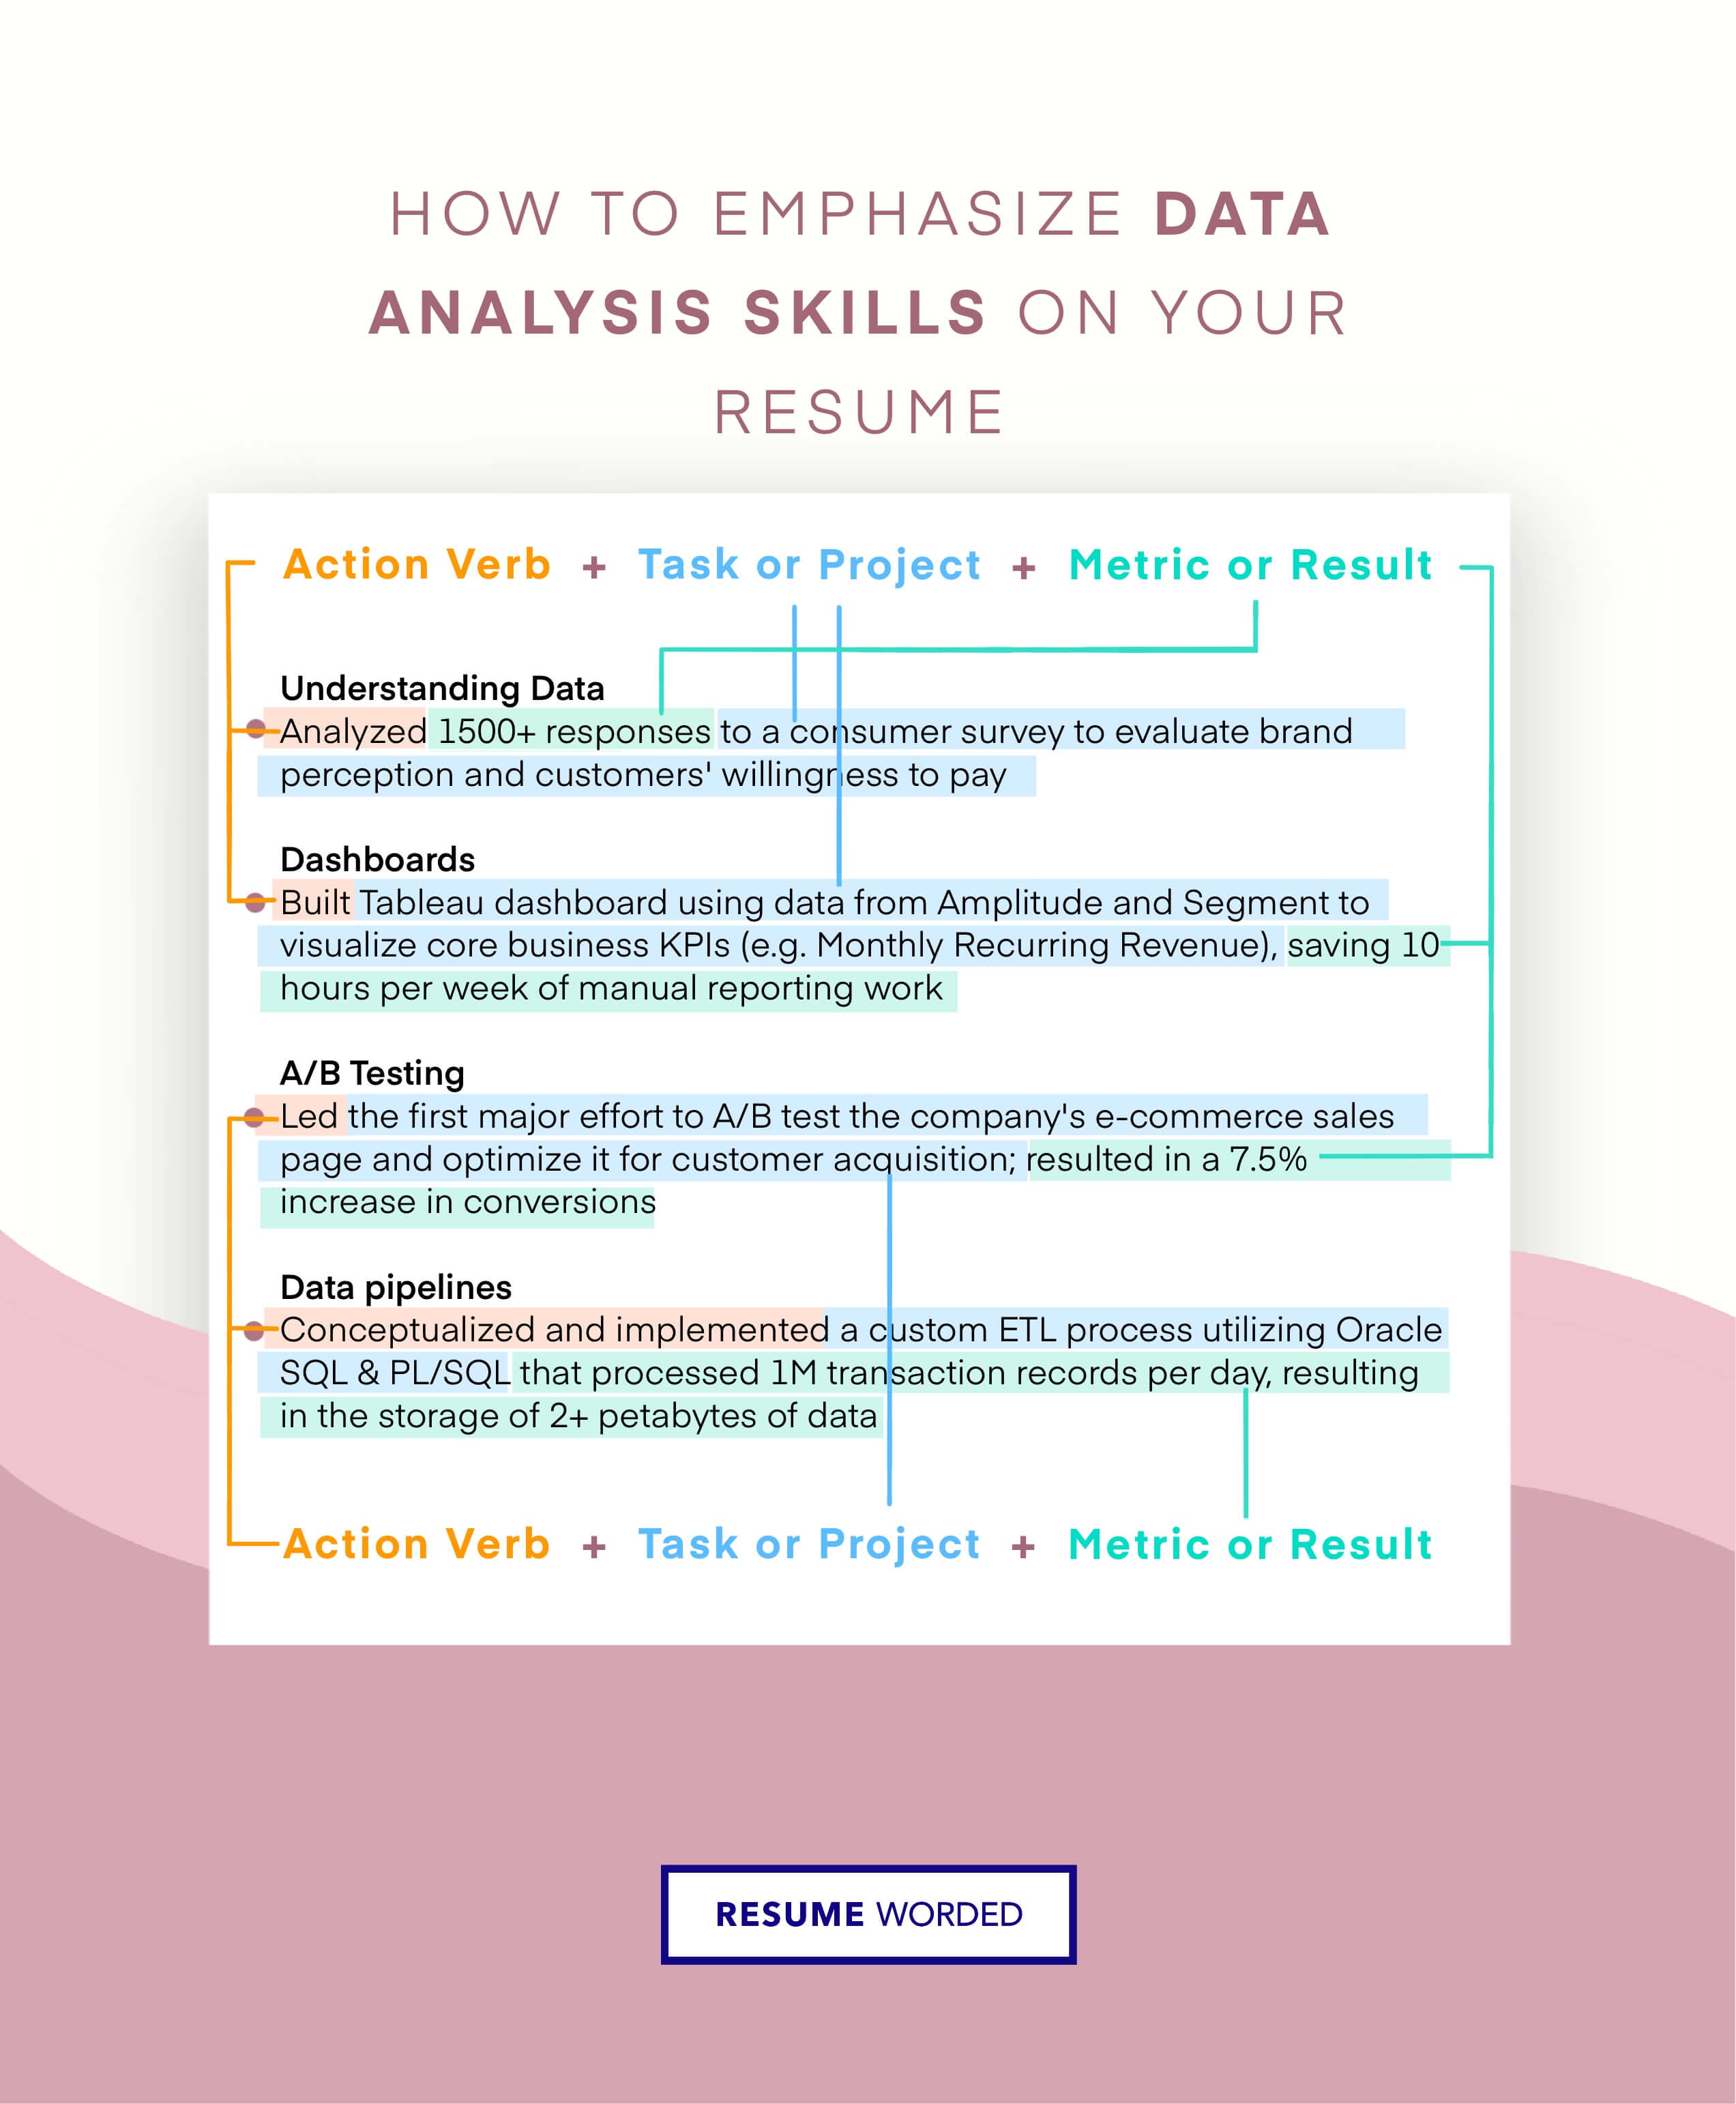 Demonstrate your ability to present data in a concise way - Business Intelligence Analyst Resume